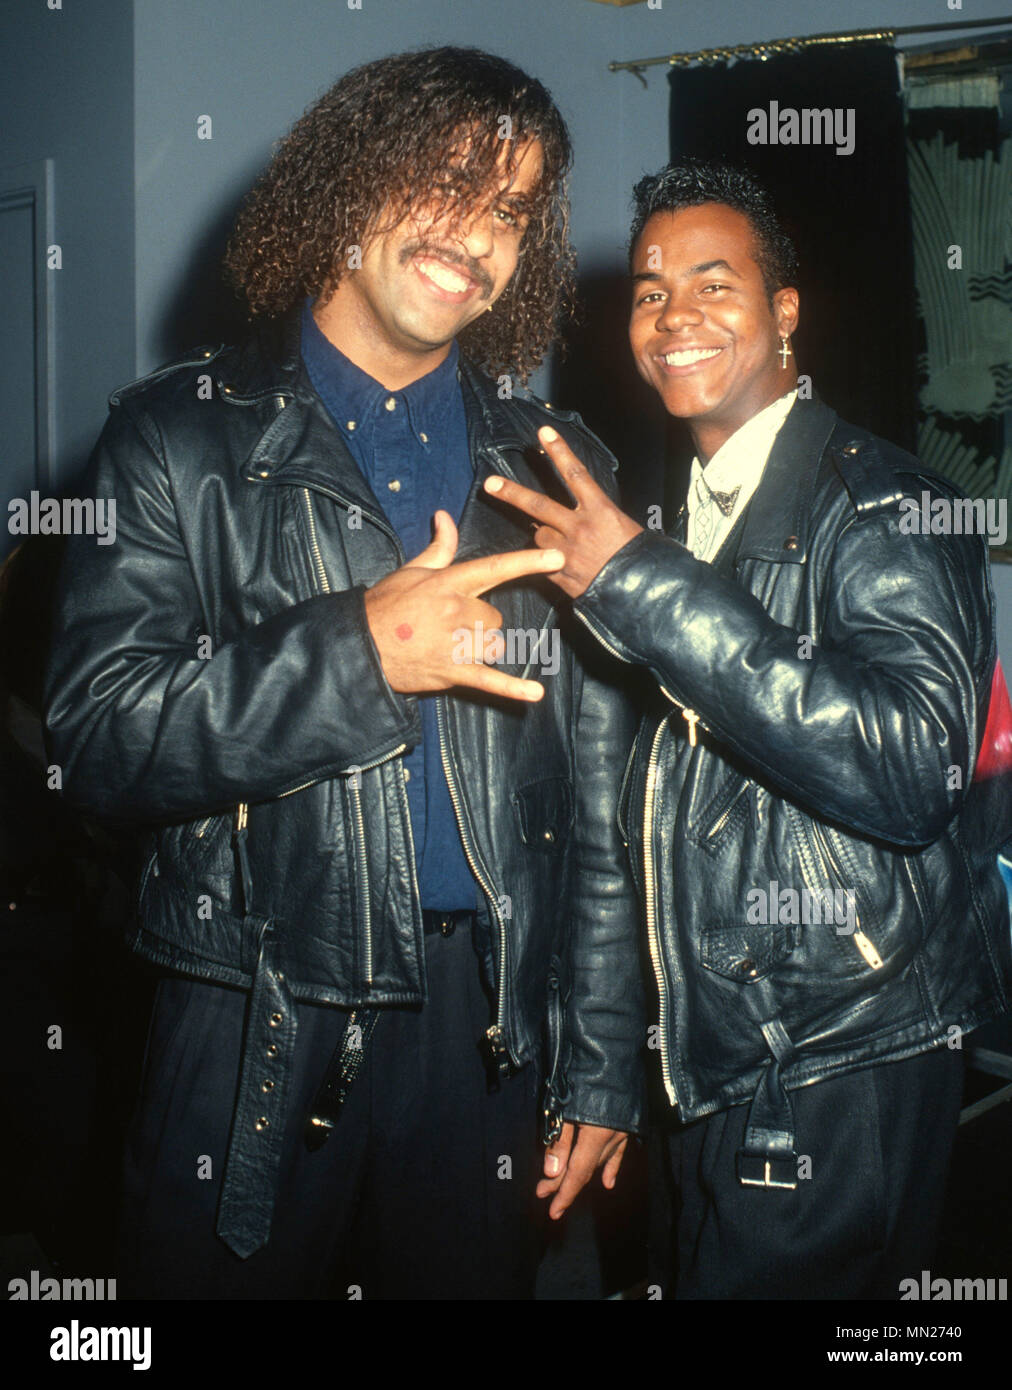 LOS ANGELES, CA - JULY 24: (L-R) Lou Rawls Jr. and Marvin Gaye Jr. attend Creem Magazine party on July 24, 1990 in Los Angeles, California. Photo by Barry King/Alamy Stock Photo Stock Photo